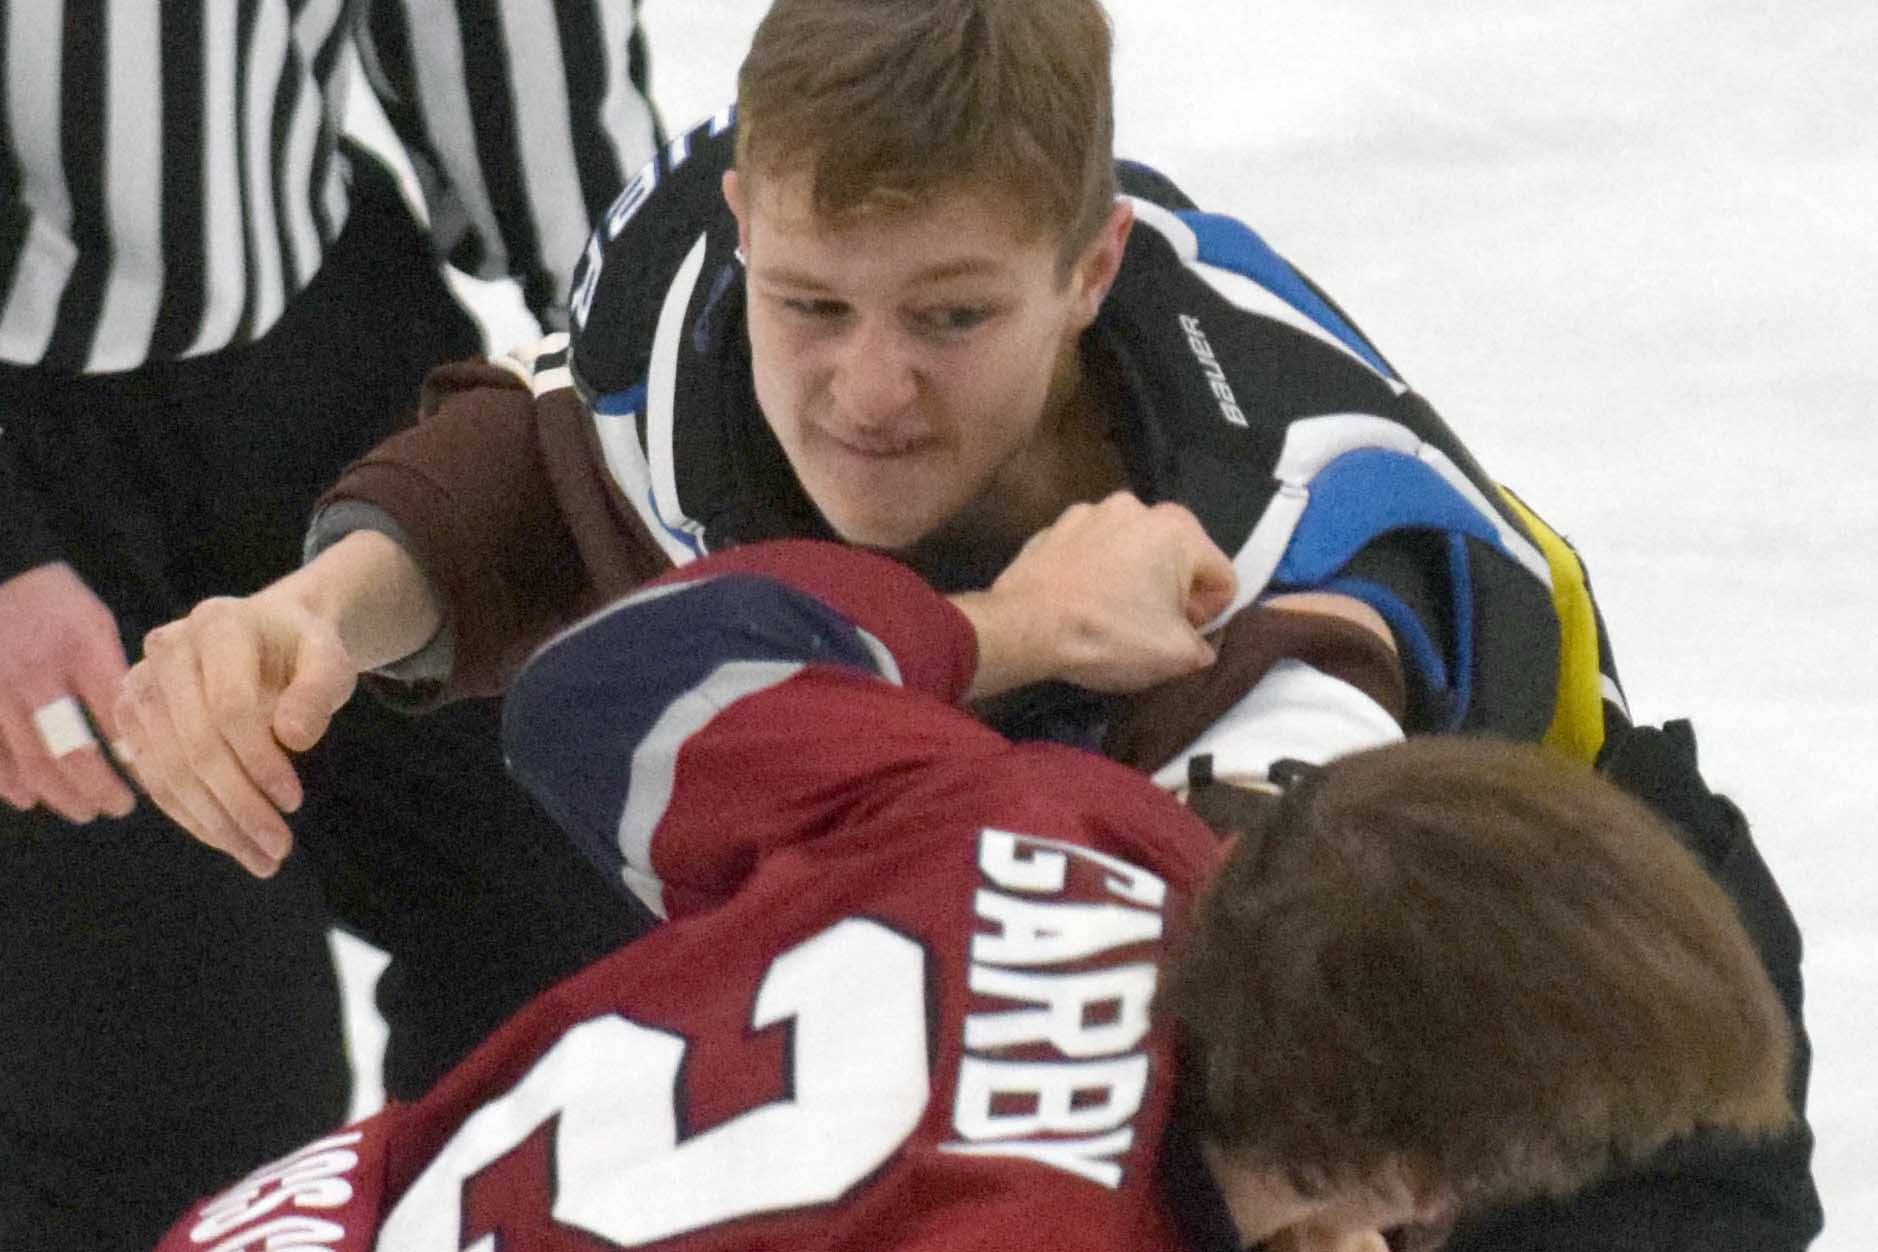 Kenai River Brown Bears forward Porter Schachle trades blows with Fairbanks Ice Dogs defenseman Andrew Garby on Friday, Nov. 22, 2019, at the Soldotna Regional Sports Complex in Soldotna, Alaska. (Photo by Jeff Helminiak/Peninsula Clarion)